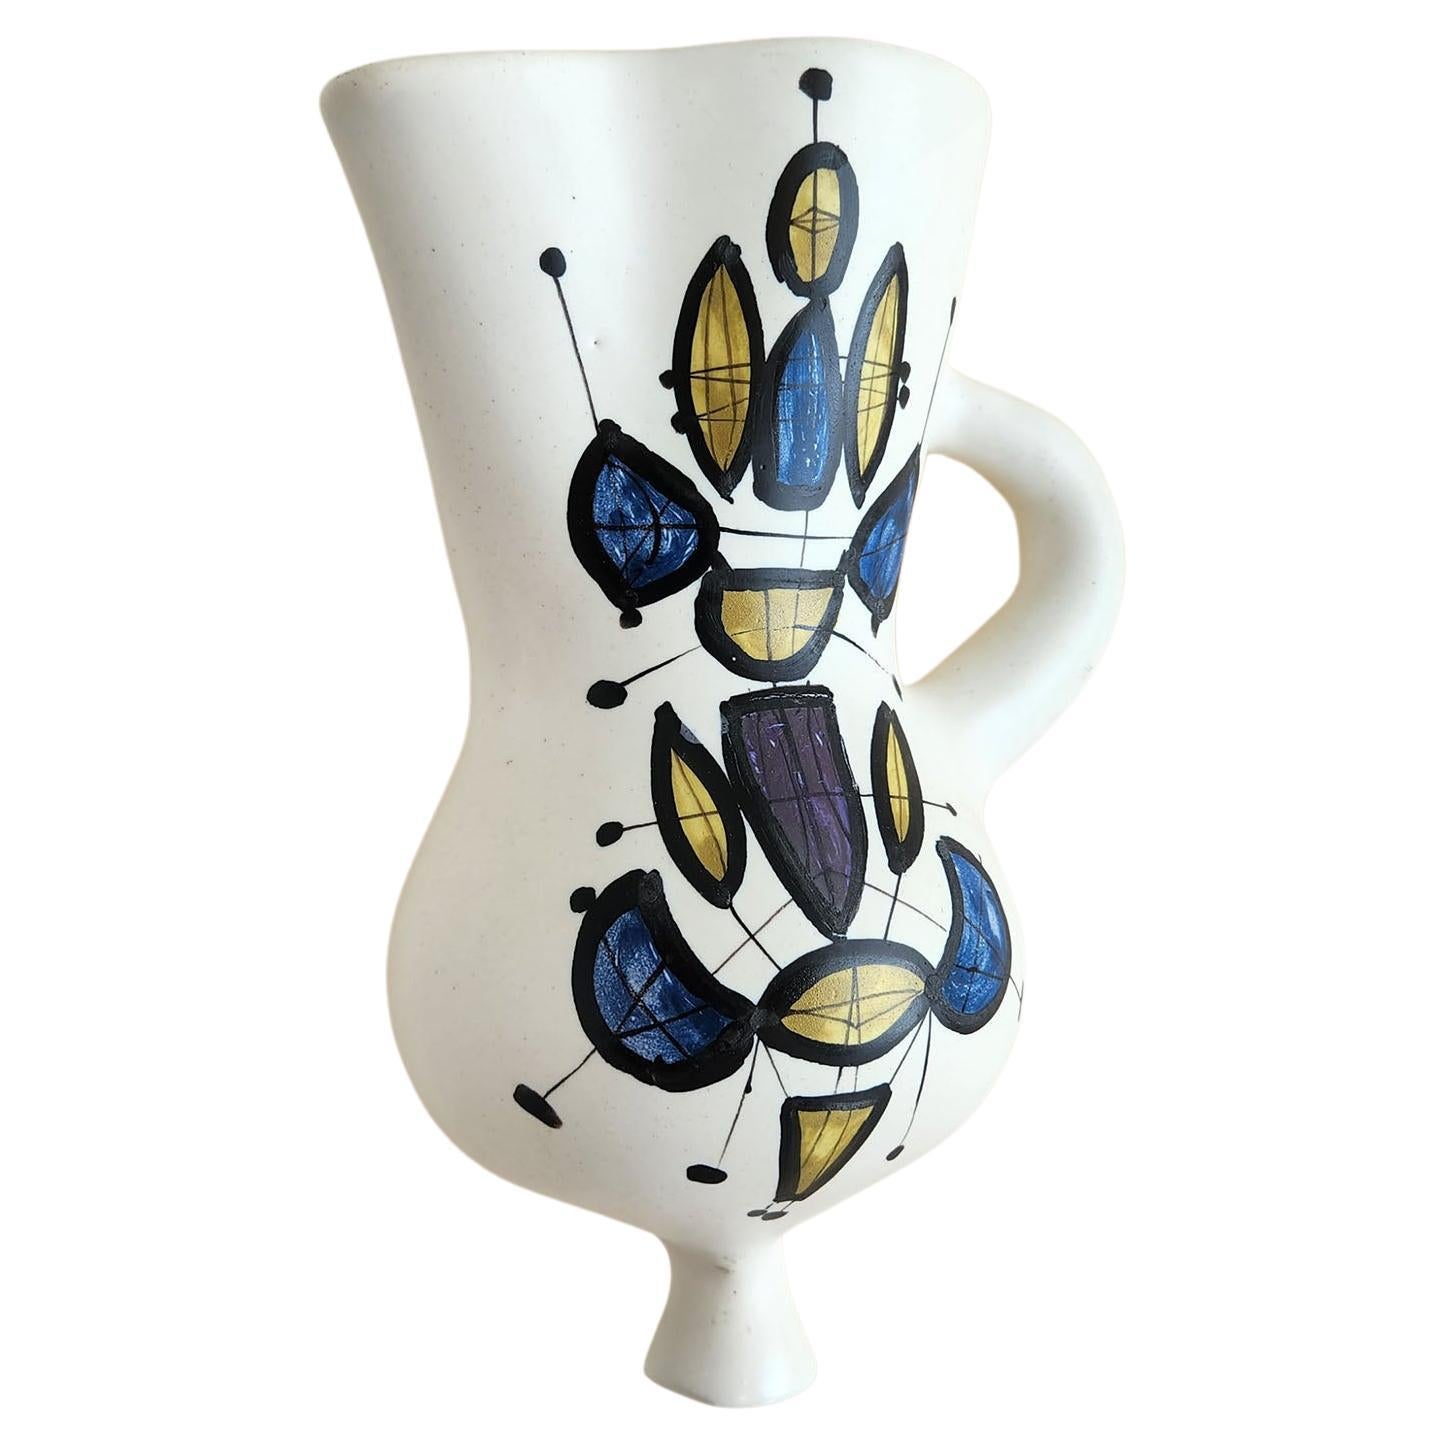 Roger Capron - Vintage Ceramic Wall Mounted Vase with Abstract Motive